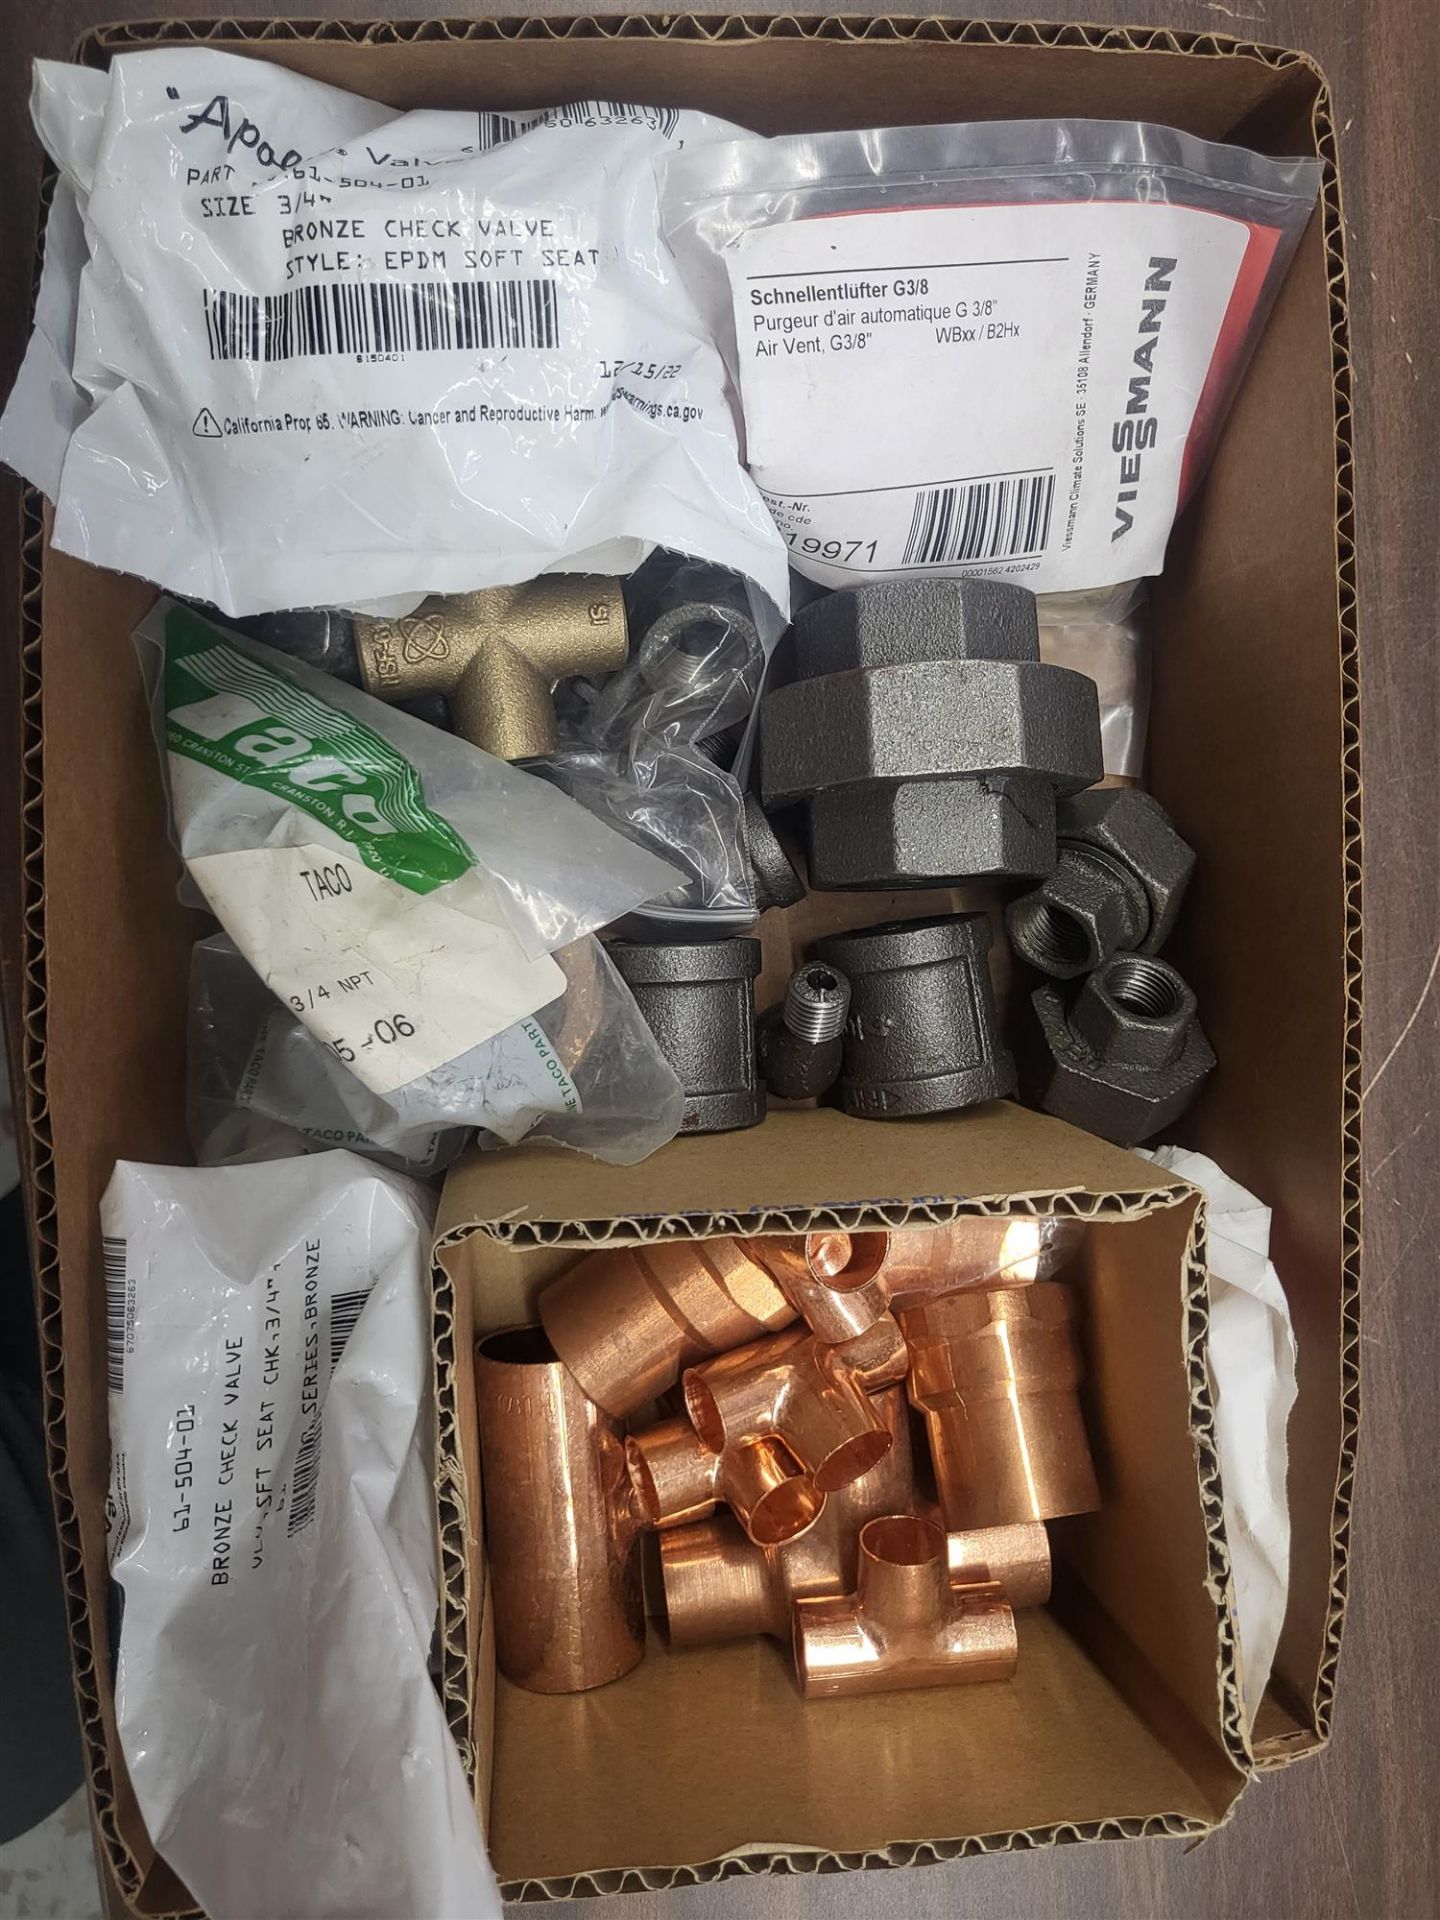 Mixed Lot of Plumbing Supplies - See Photos for Details